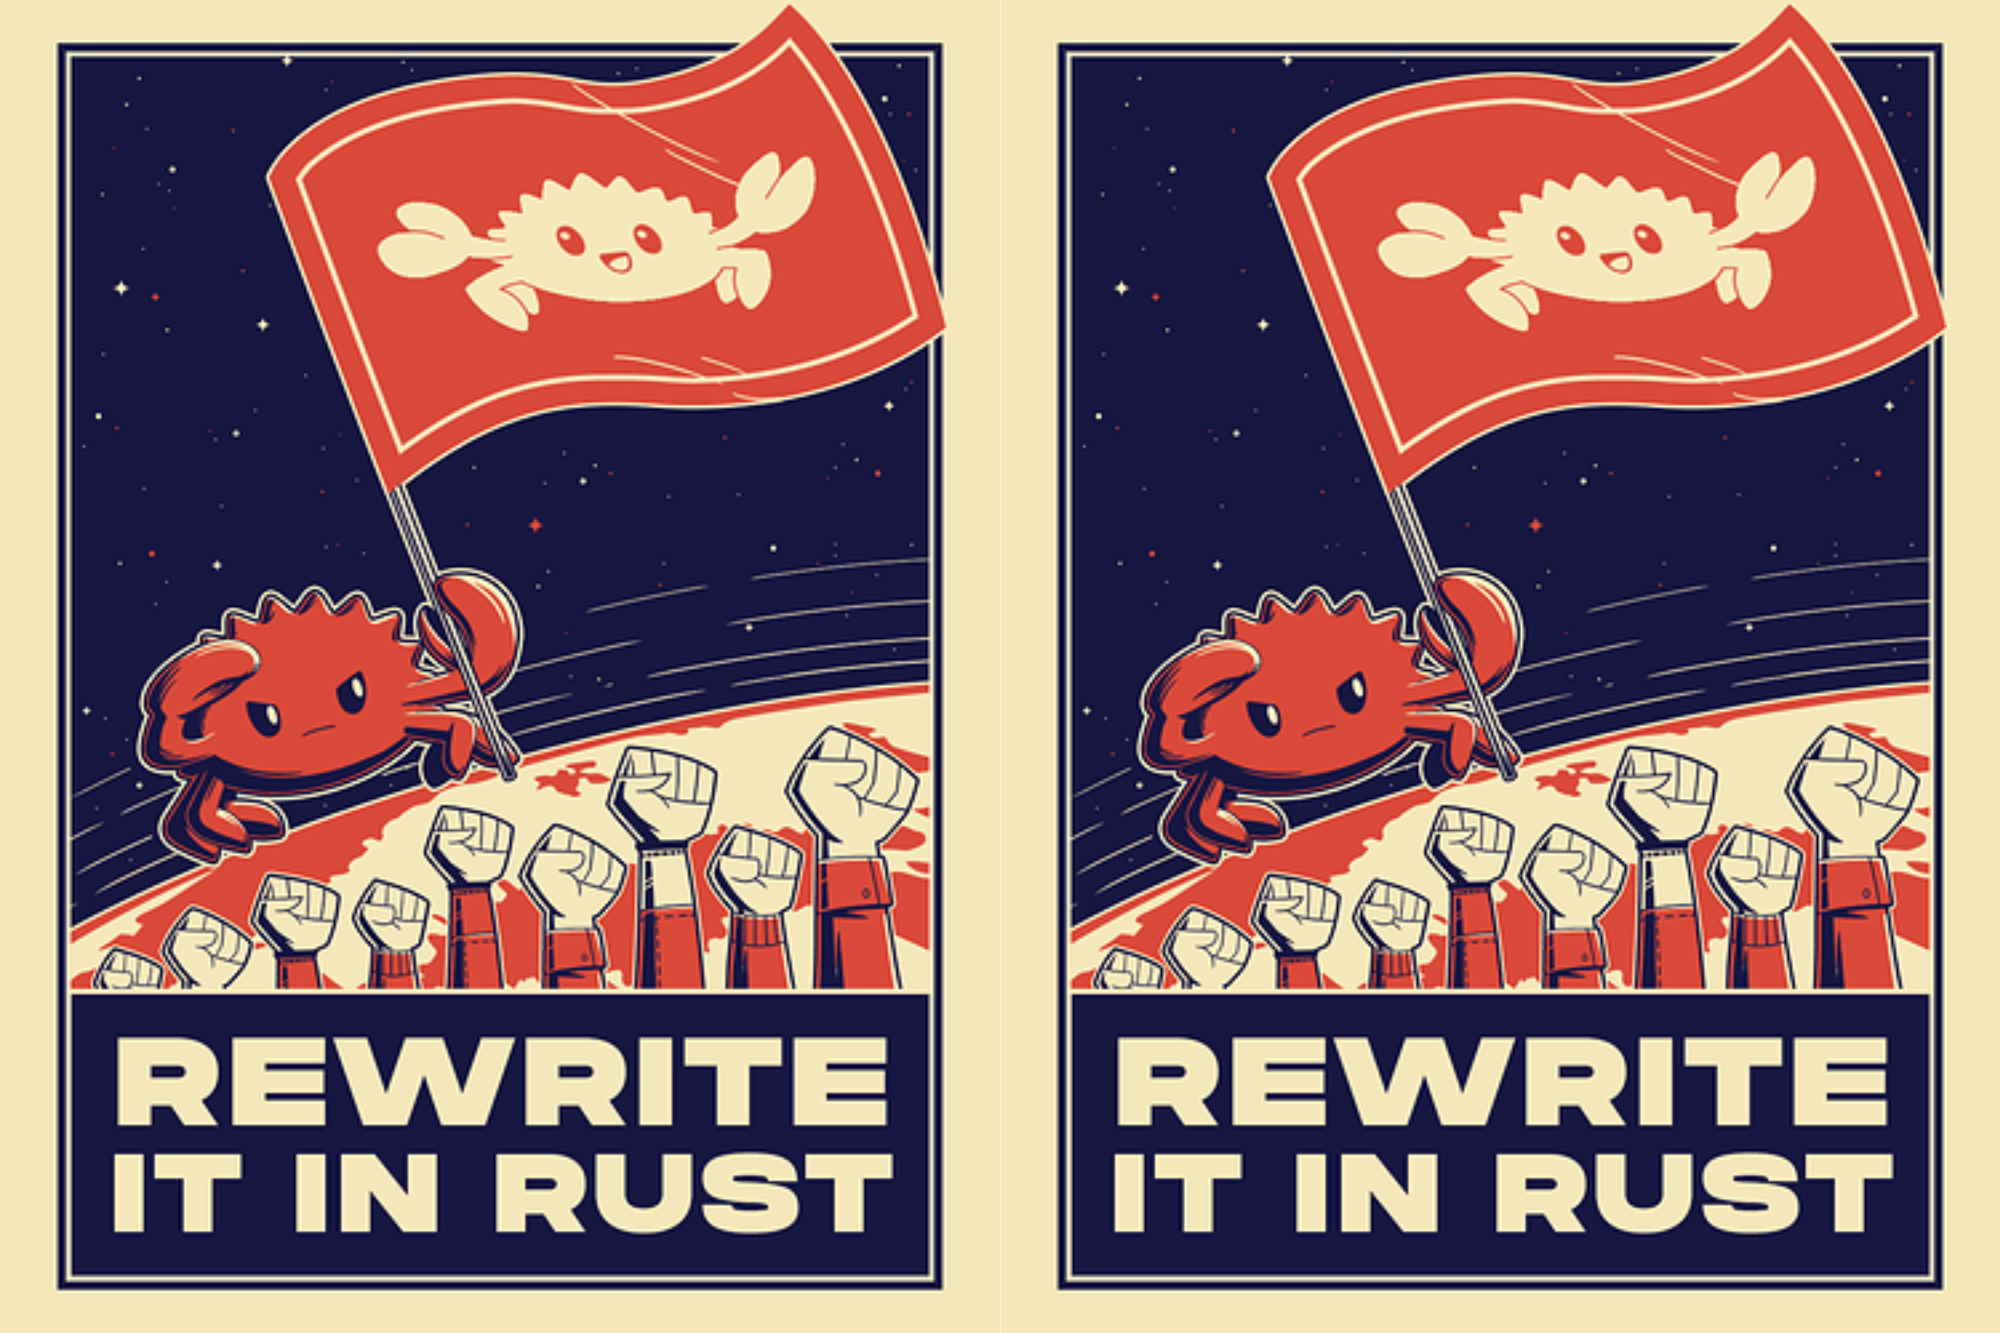 Why We're Rewriting in Rust